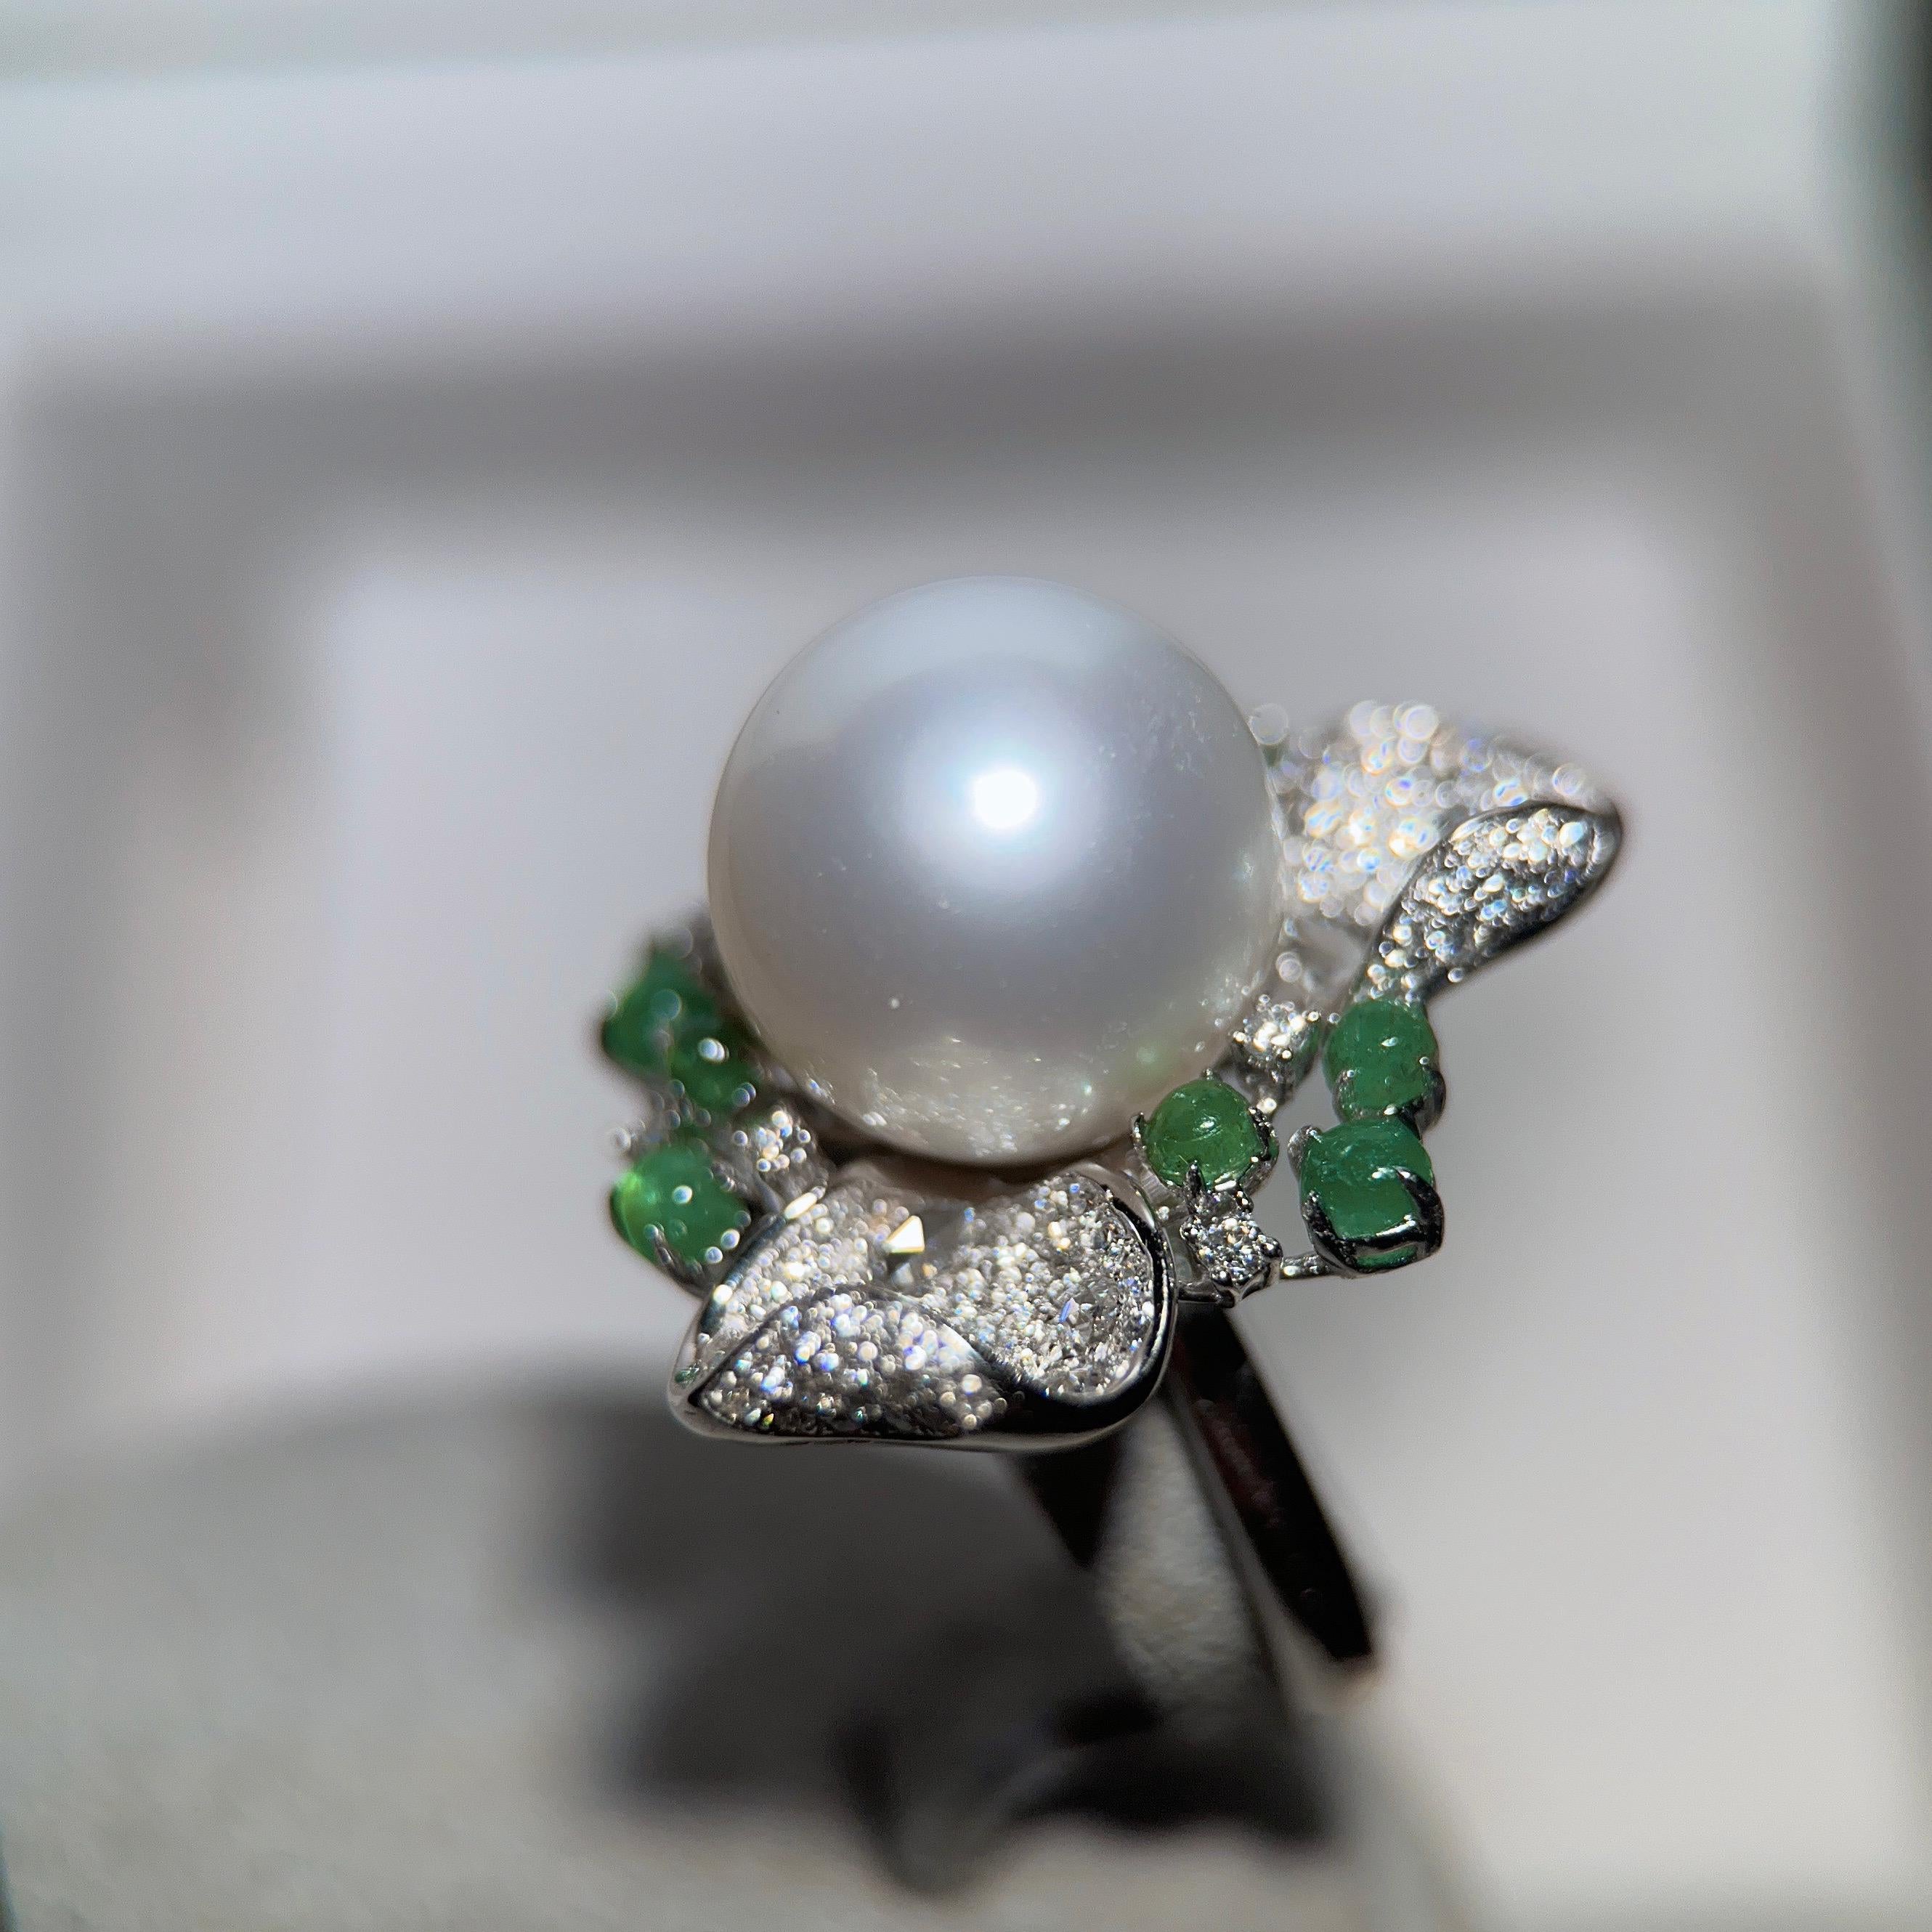 Eostre South Sea Pearl Emerald cabochon  and Diamond Ring in 18k White Gold. The pearl  is flawless with medium lustre. The colour is creamy white. The emerald cabochon is vivid green colour with great clarity.


The South Sea Pearl is  13mm
Total